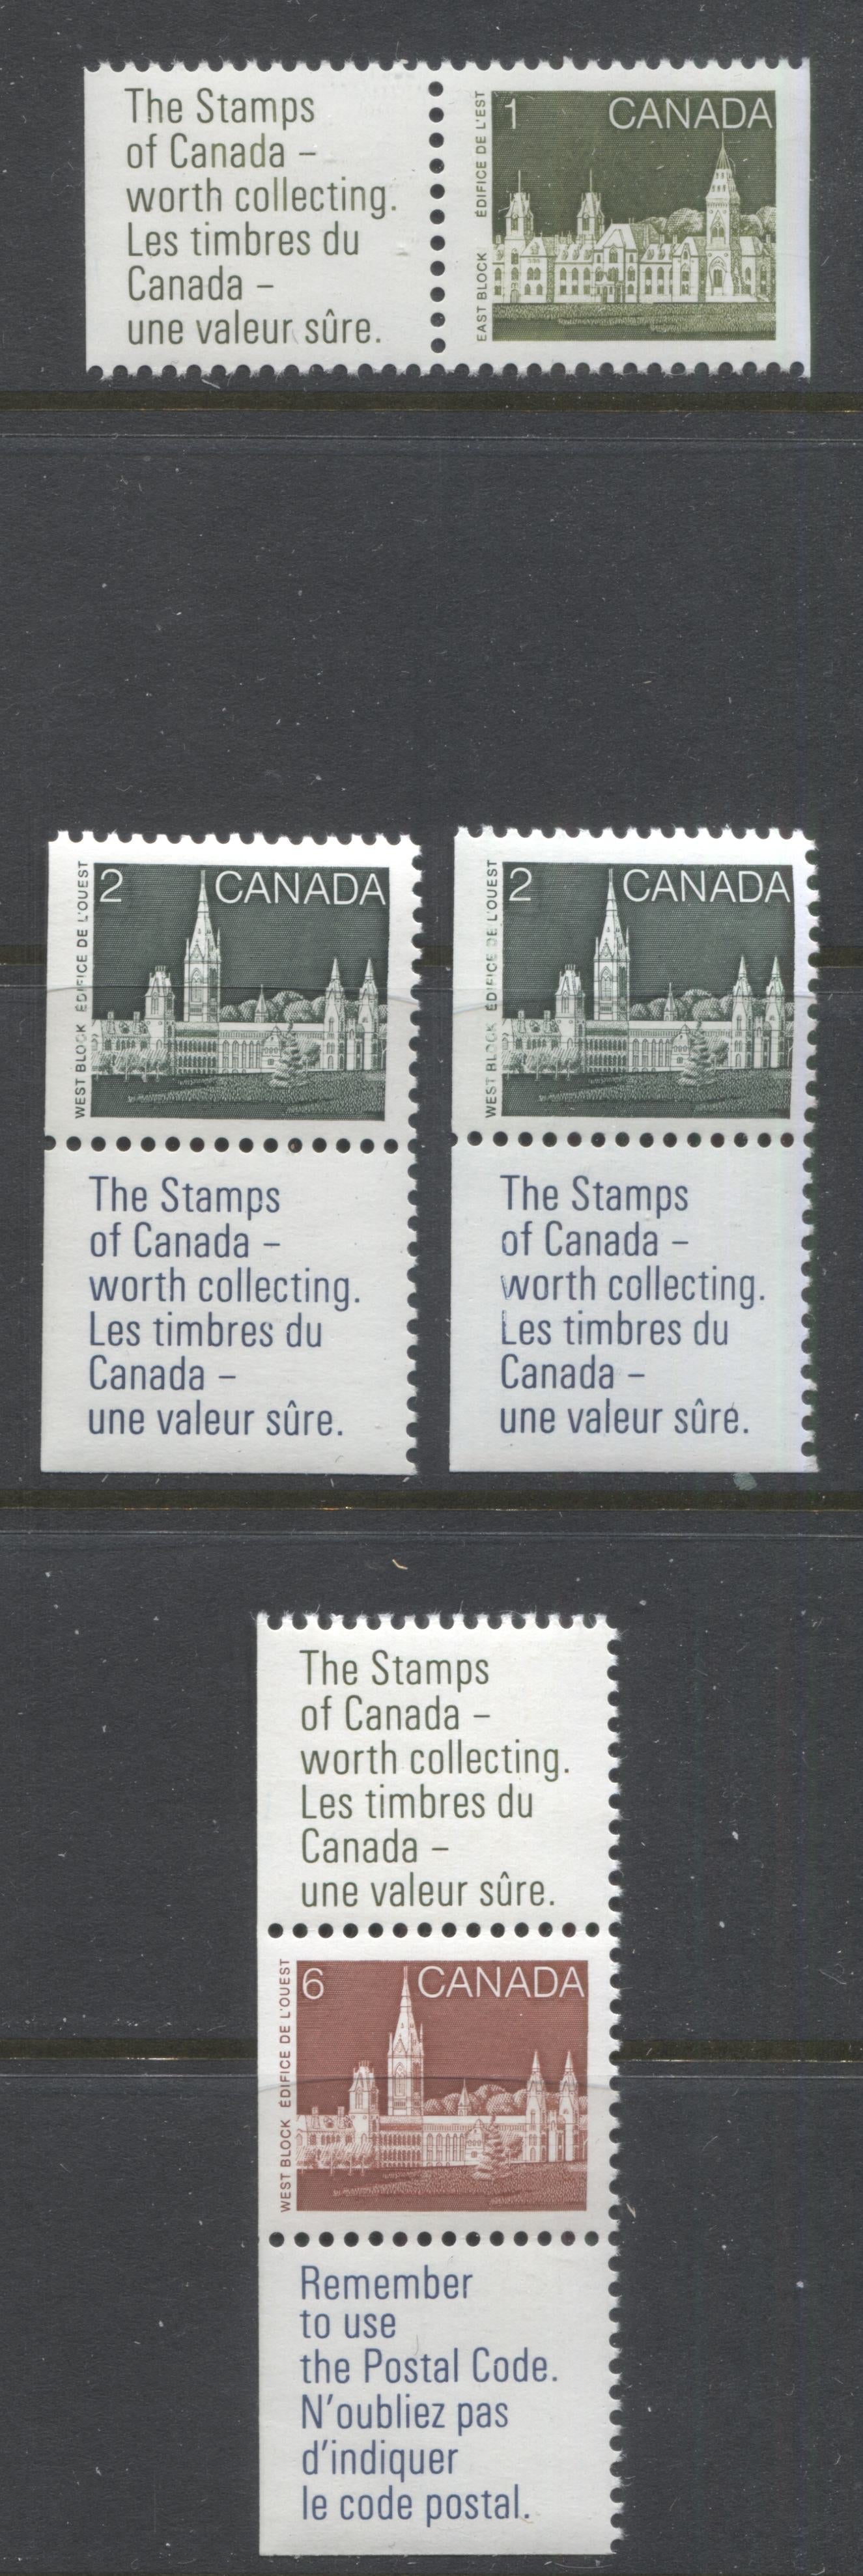 Lot 389 Canada #938i, 939a-ai, 942i 1c, 2c, 6c Sage Green, Slate Green & Deep Violet Parliament Buildings, 1982-1987 Artifacts & National Parks Issue, 4 VFNH Stamp-Label Pairs and Strips, NF/NF to DF/LF , Harrison Papers